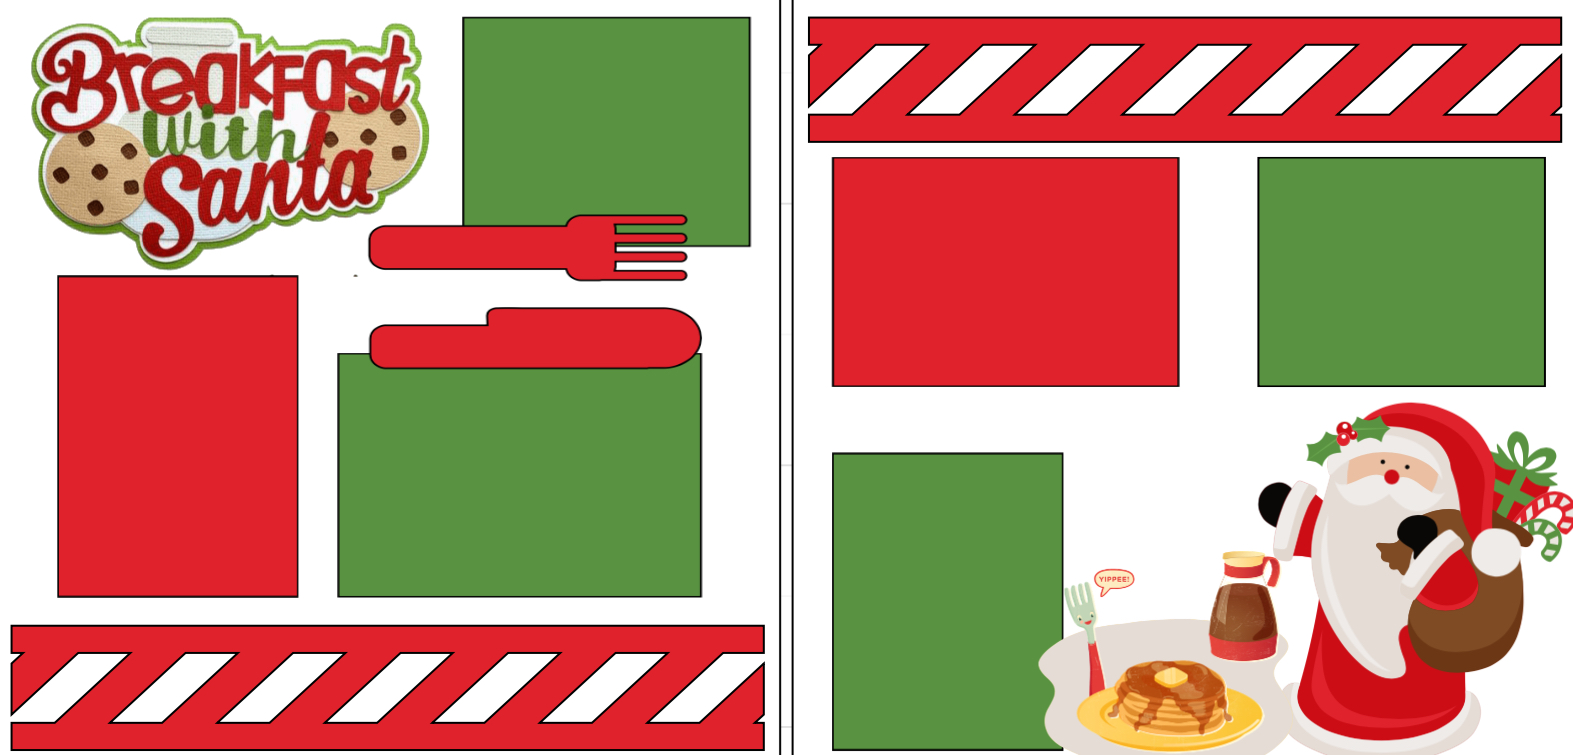 Breakfast with Santa -  page kit